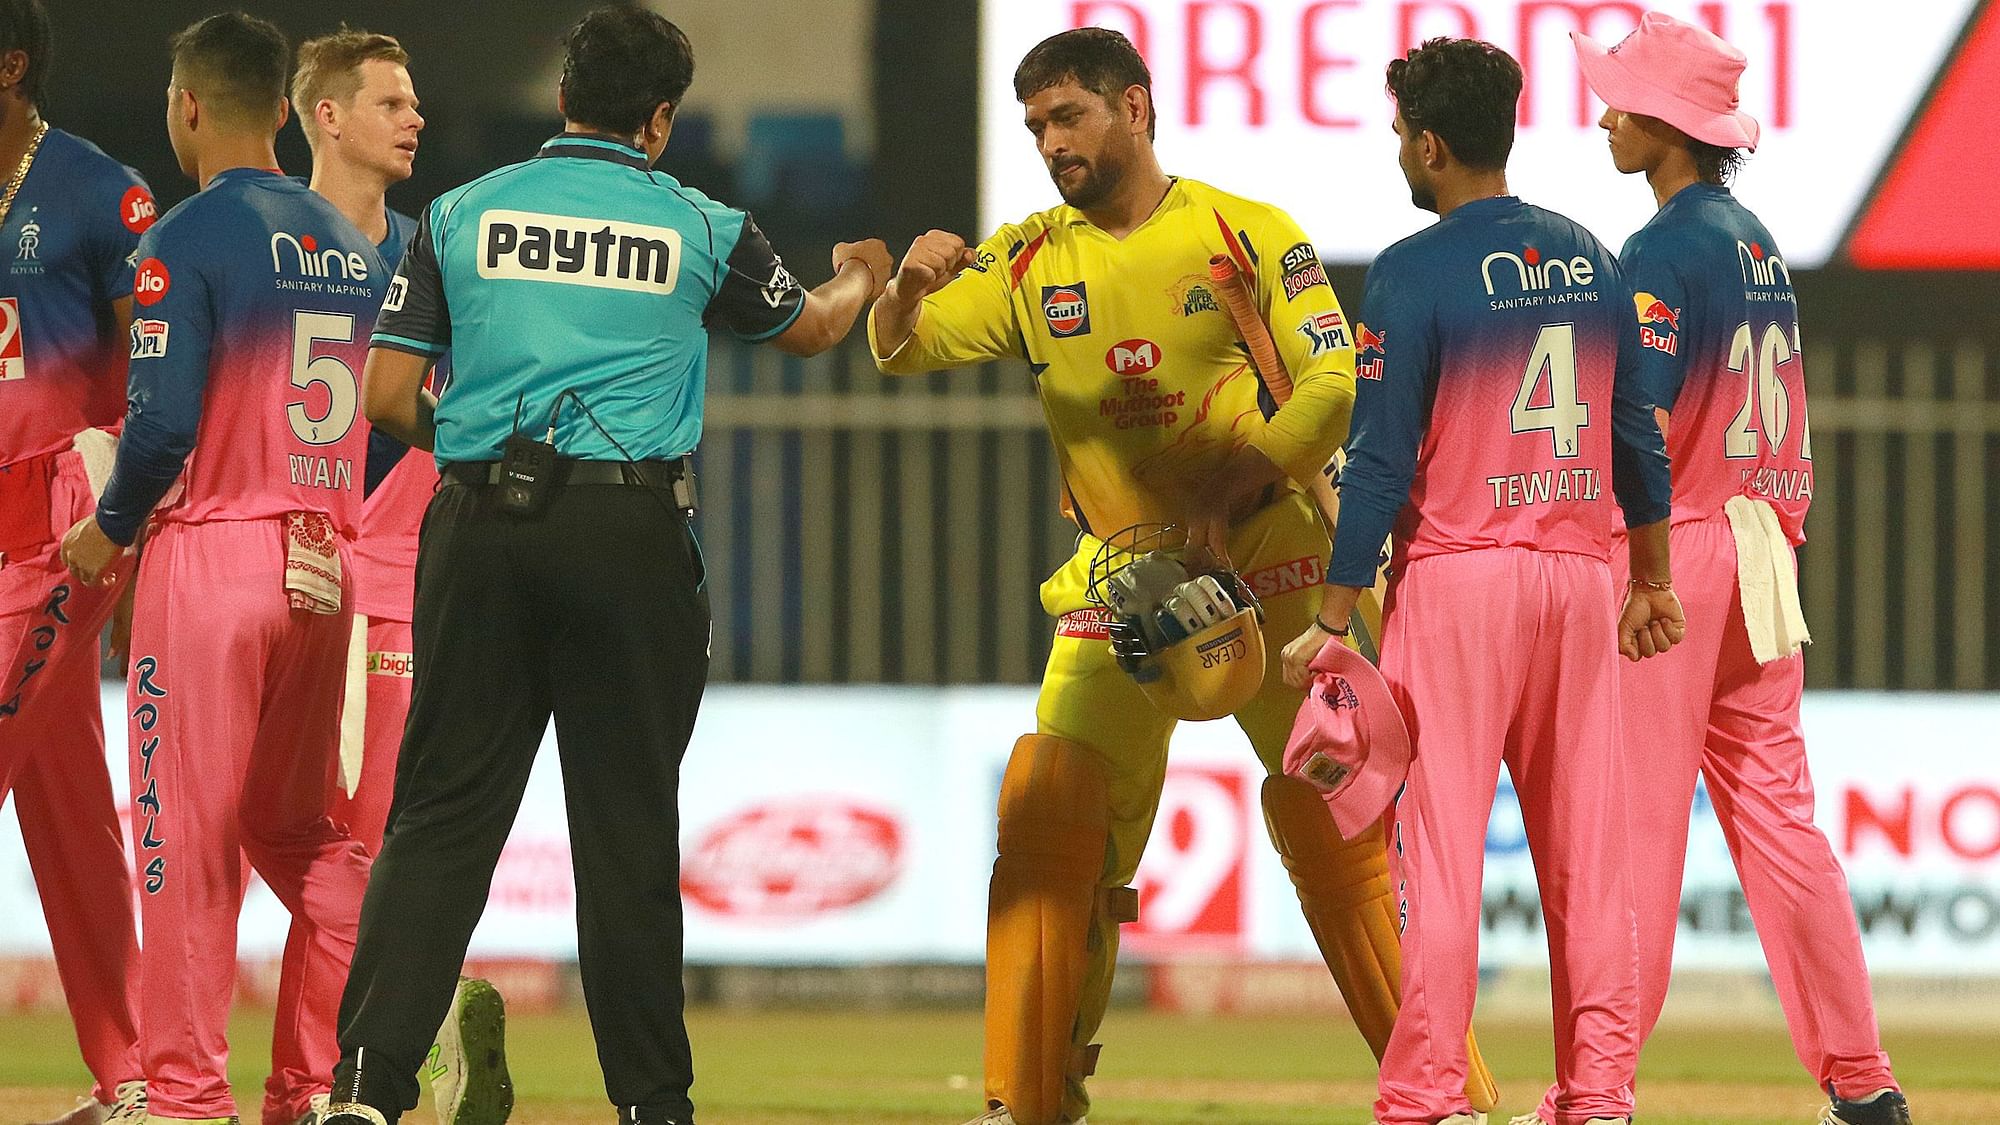 Chennai Super Kings captain MS Dhoni fist bumps the umpire as Rajasthan Royals Captain Steve Smith looks on.&nbsp;